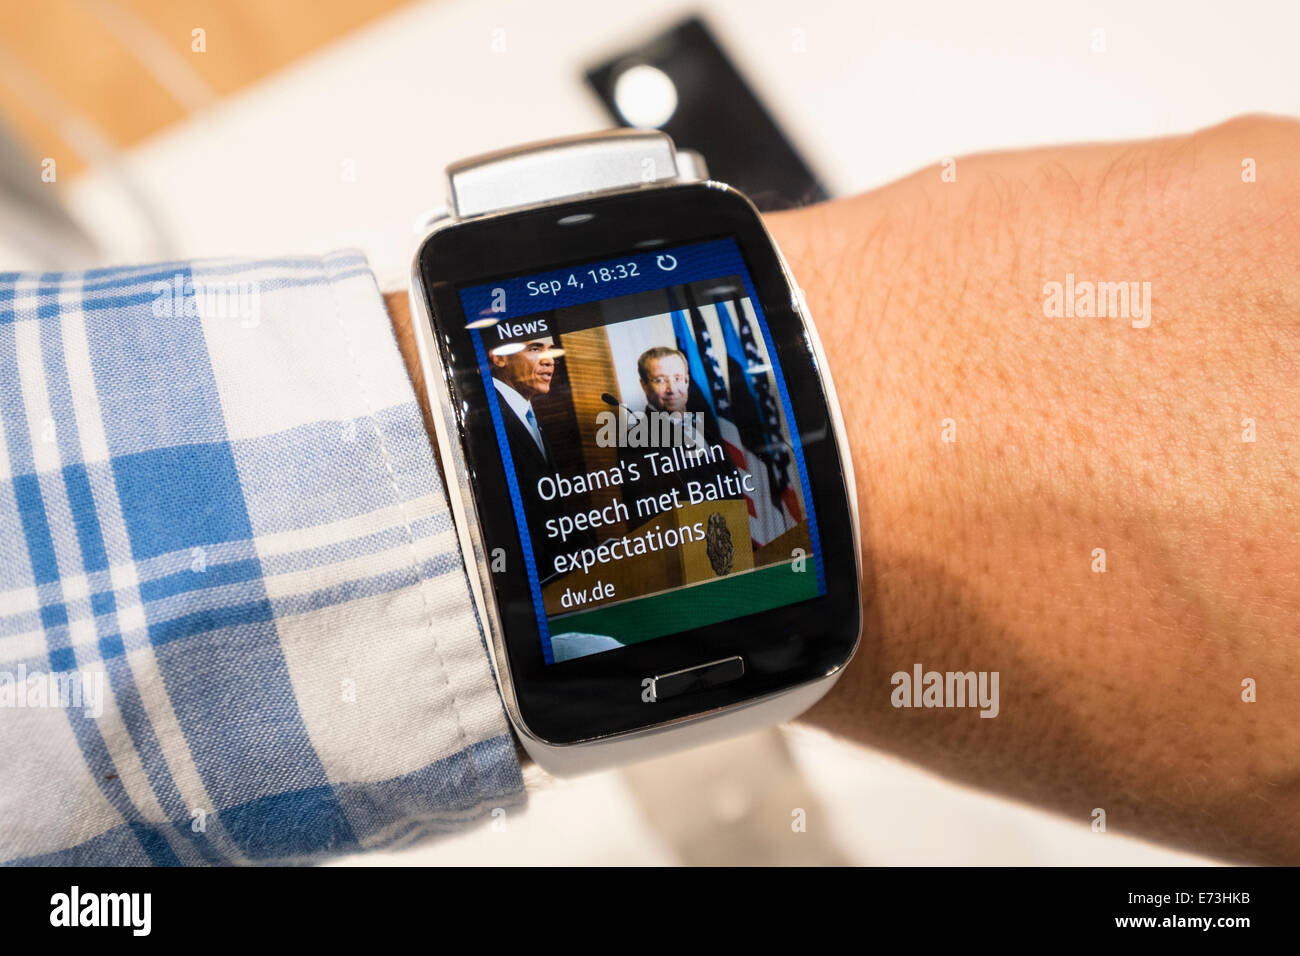 Berlin, Germany. 5th September, 2014. Samsung Gear S smart watch showinging latest news  on display at IFA 2014  consumer electronics show in Berlin Germany Credit:  Iain Masterton/Alamy Live News Stock Photo